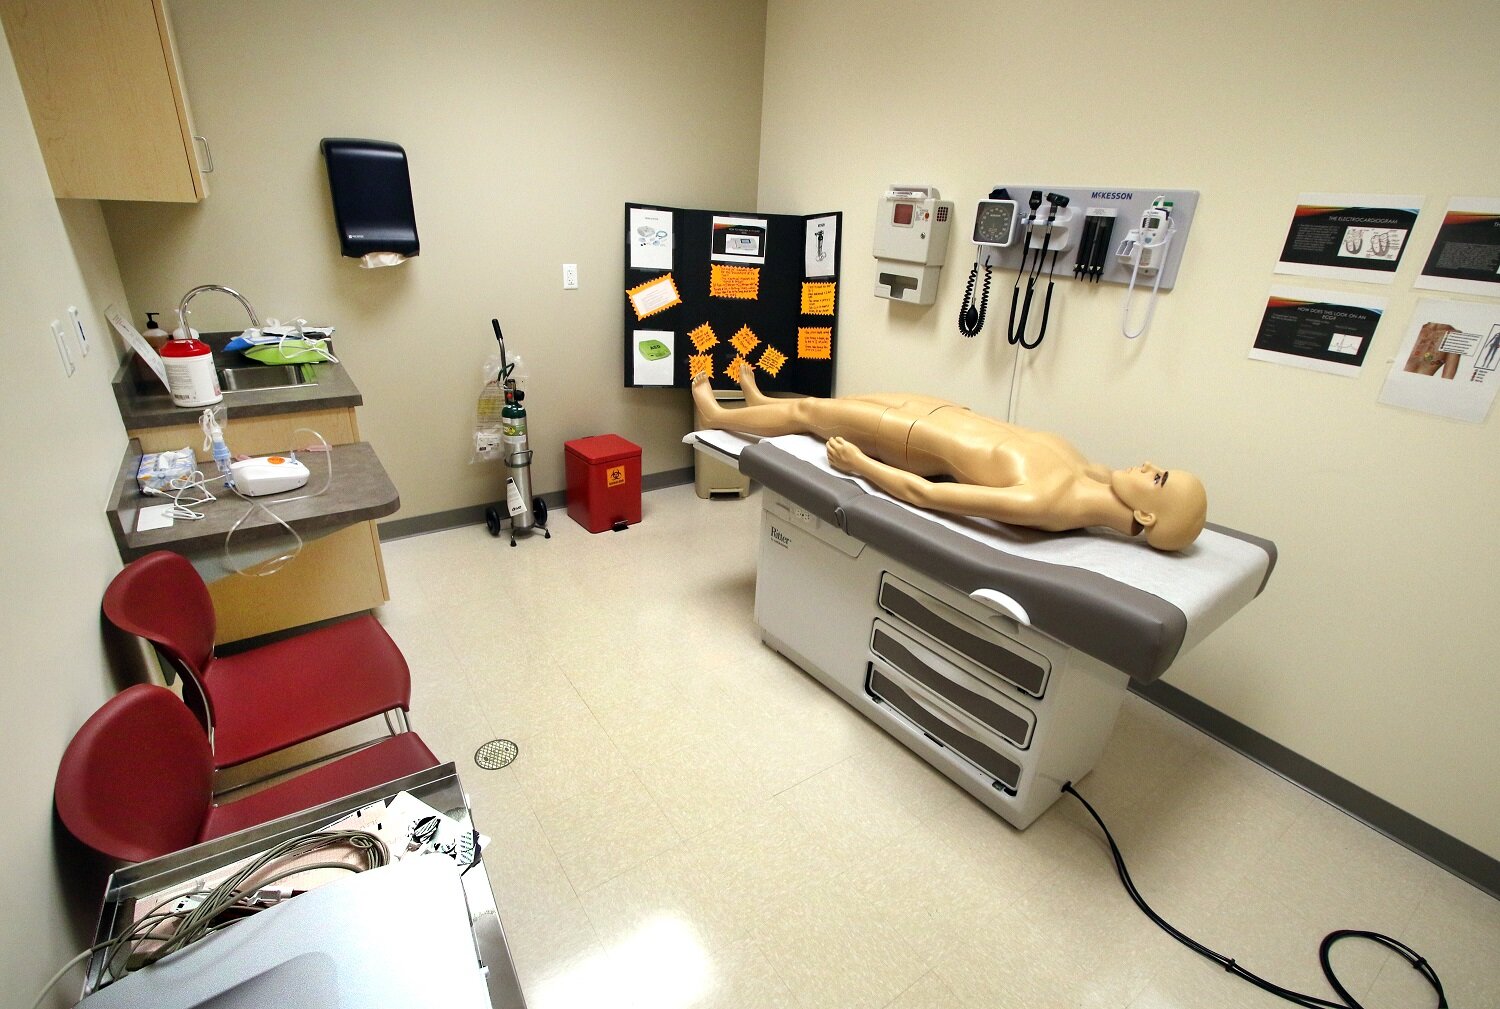 JS1_0011 CHN Clinic 3503 Martin Luther King Dr. Gary Patient room with CPR Dummy.JPG